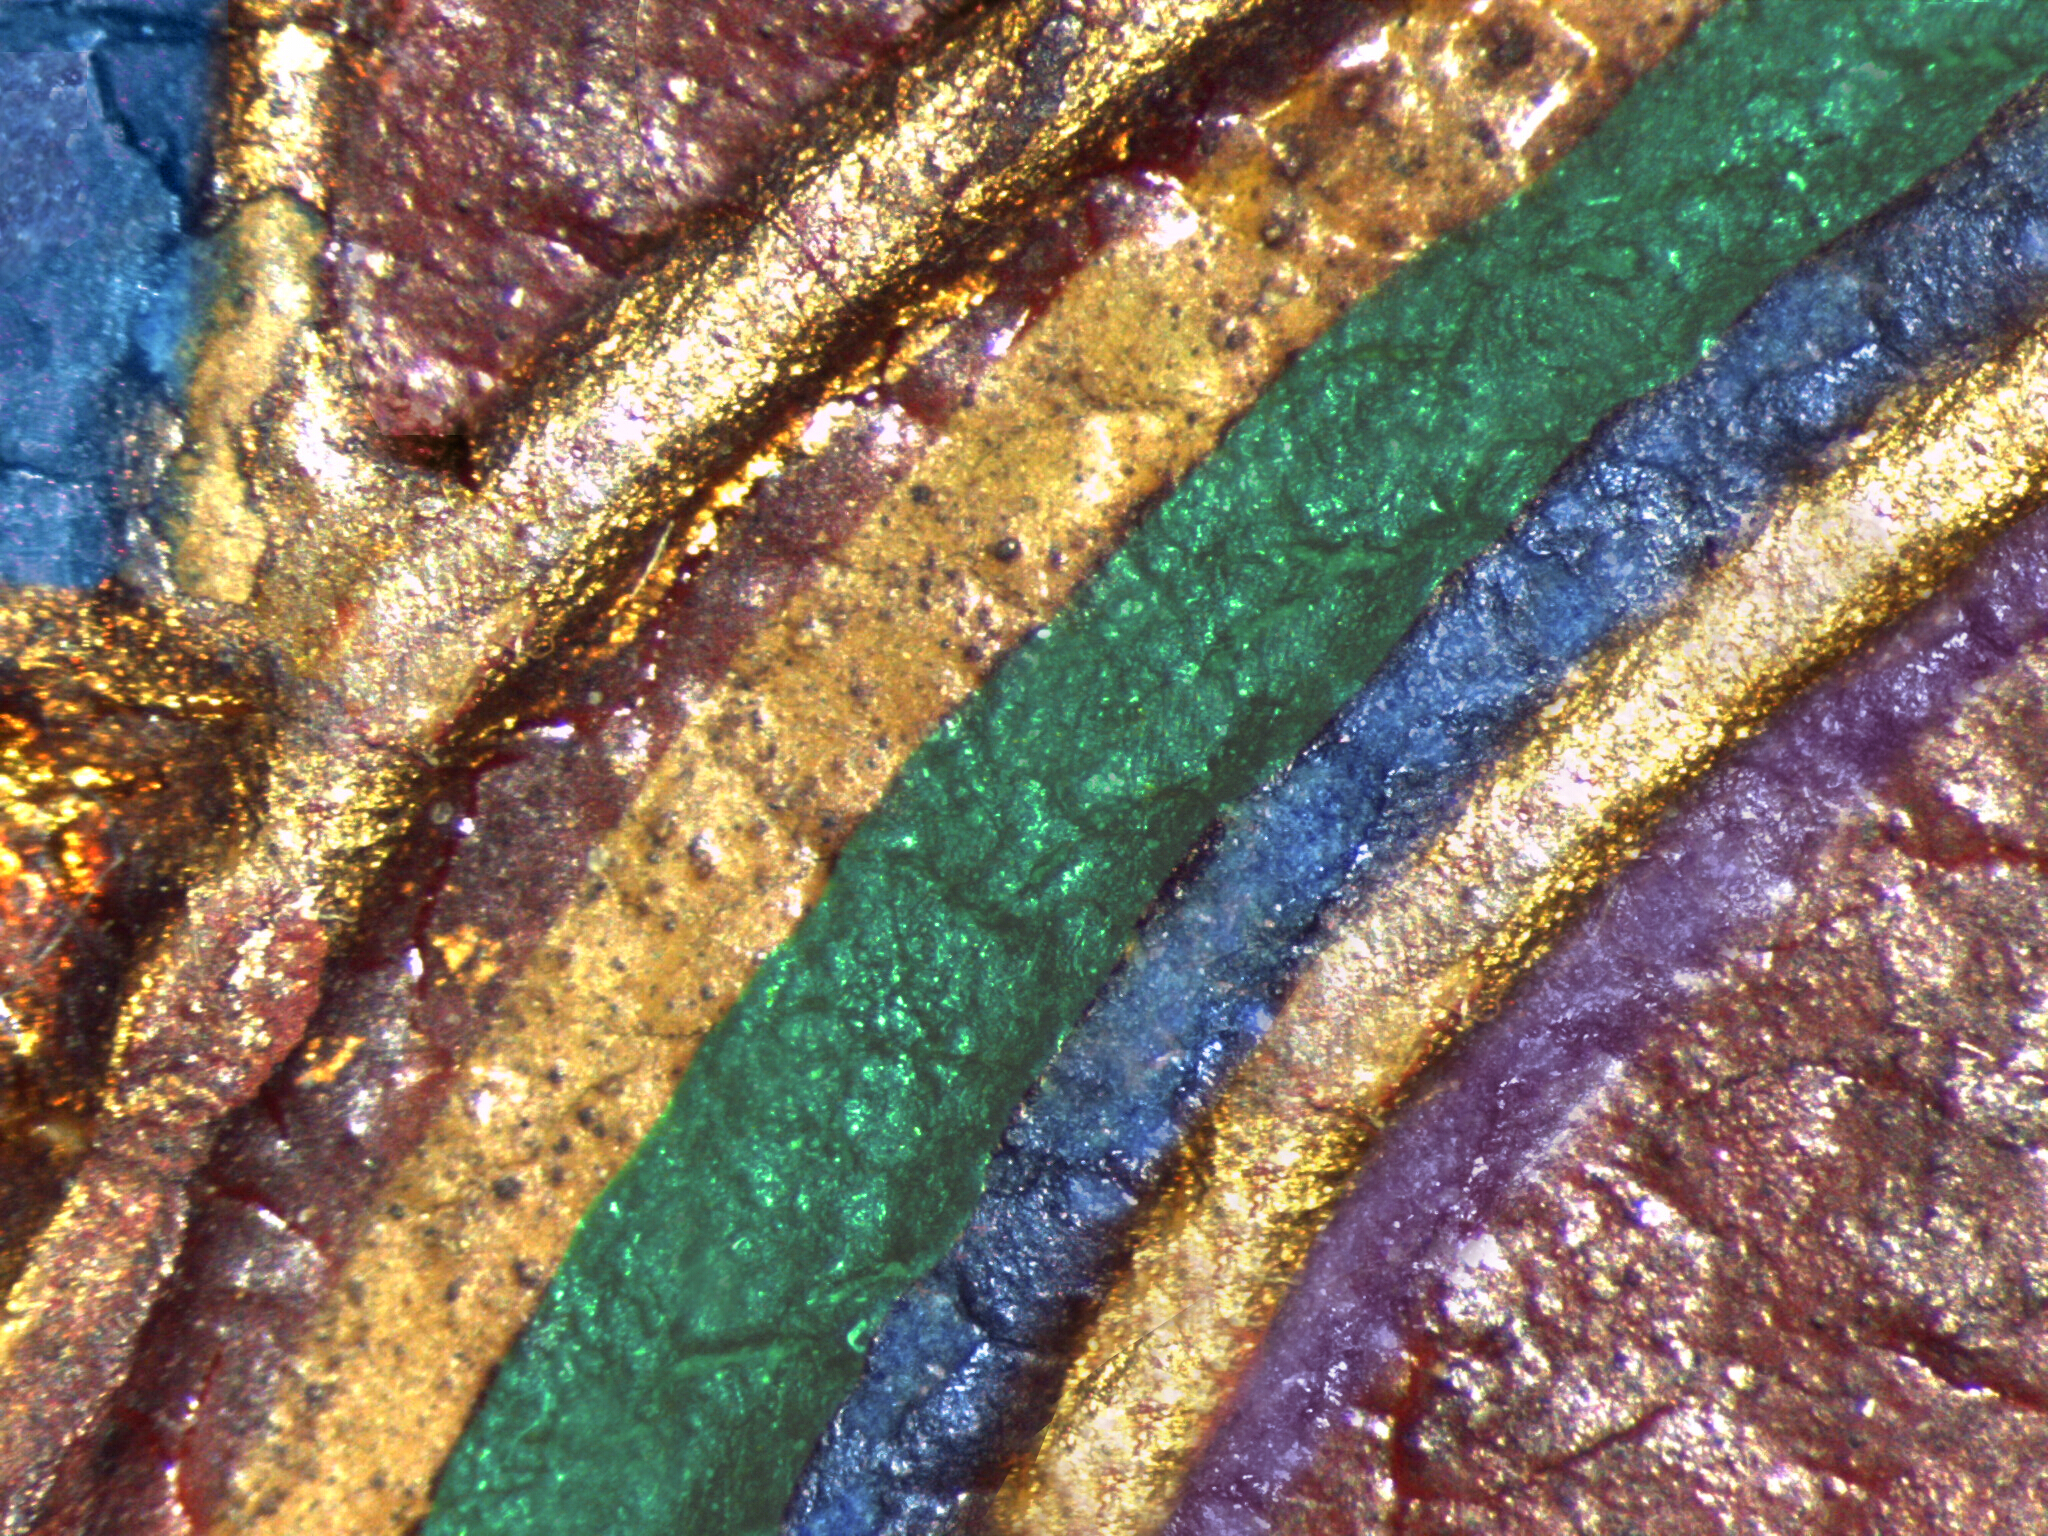 Detail of curved lines, left to right: gilded line, red, yellow, green, blue, gilded line, and purple, with red background.